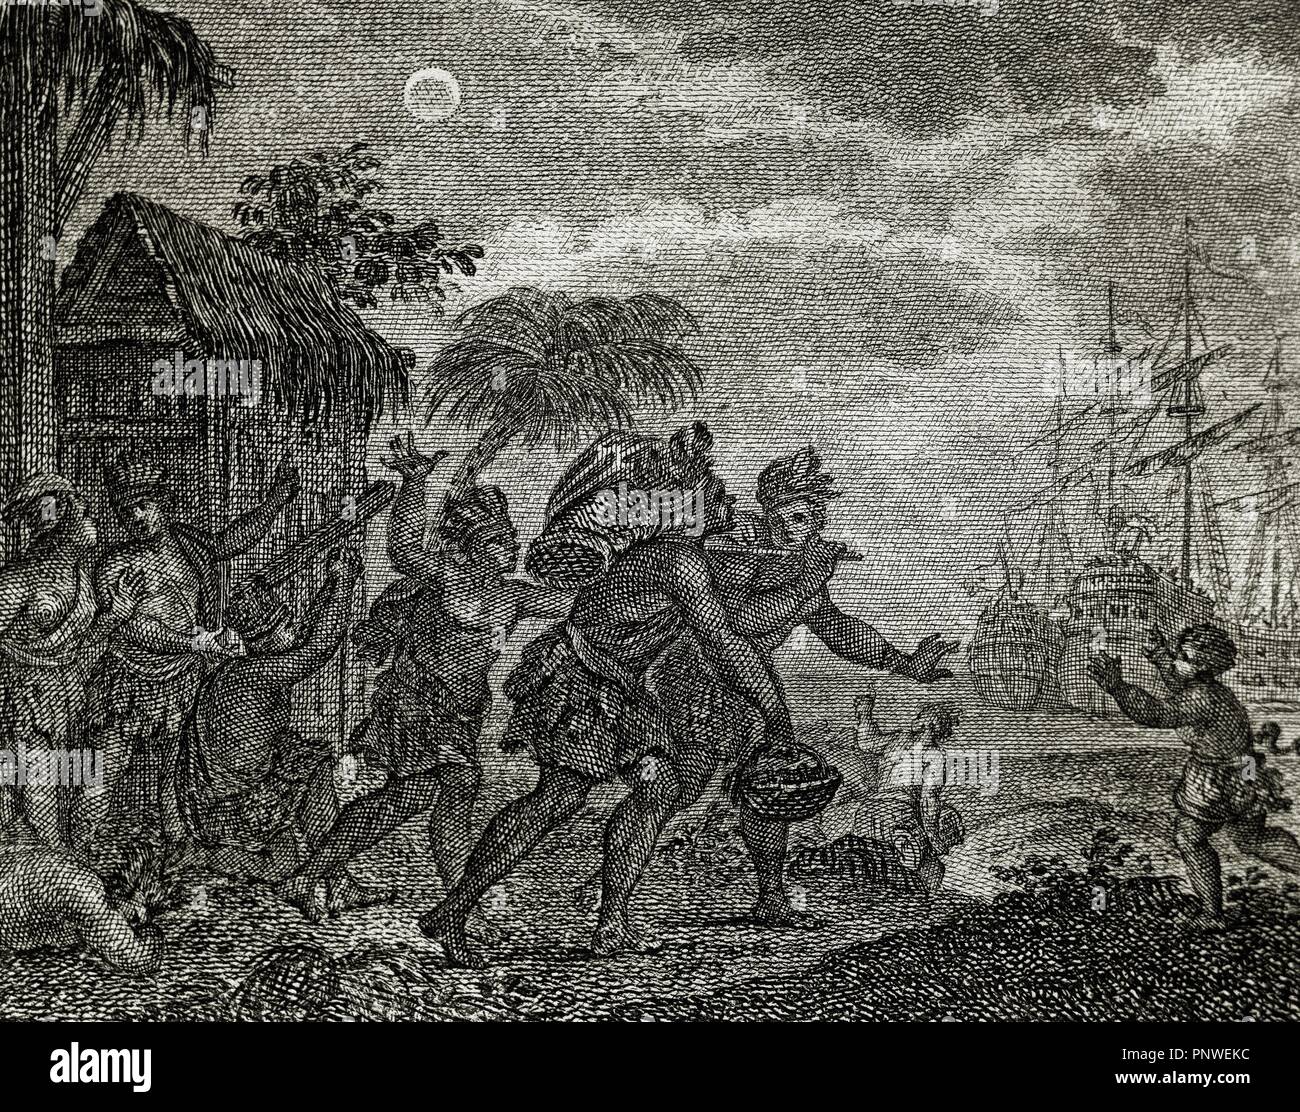 Jamaica. 15th century. Second Voyage of Columbus. Jamaicans refuse to give food to Columbus and he, knowing that there will be a lunar eclipse, tells them that God will deny the light. When the eclipse took place, fearful natives, provide abundant provisions to Columbus. The Truthful History of Conquest of New Spain by Bernal Diaz del Castillo. Engraving, 1807. Stock Photo